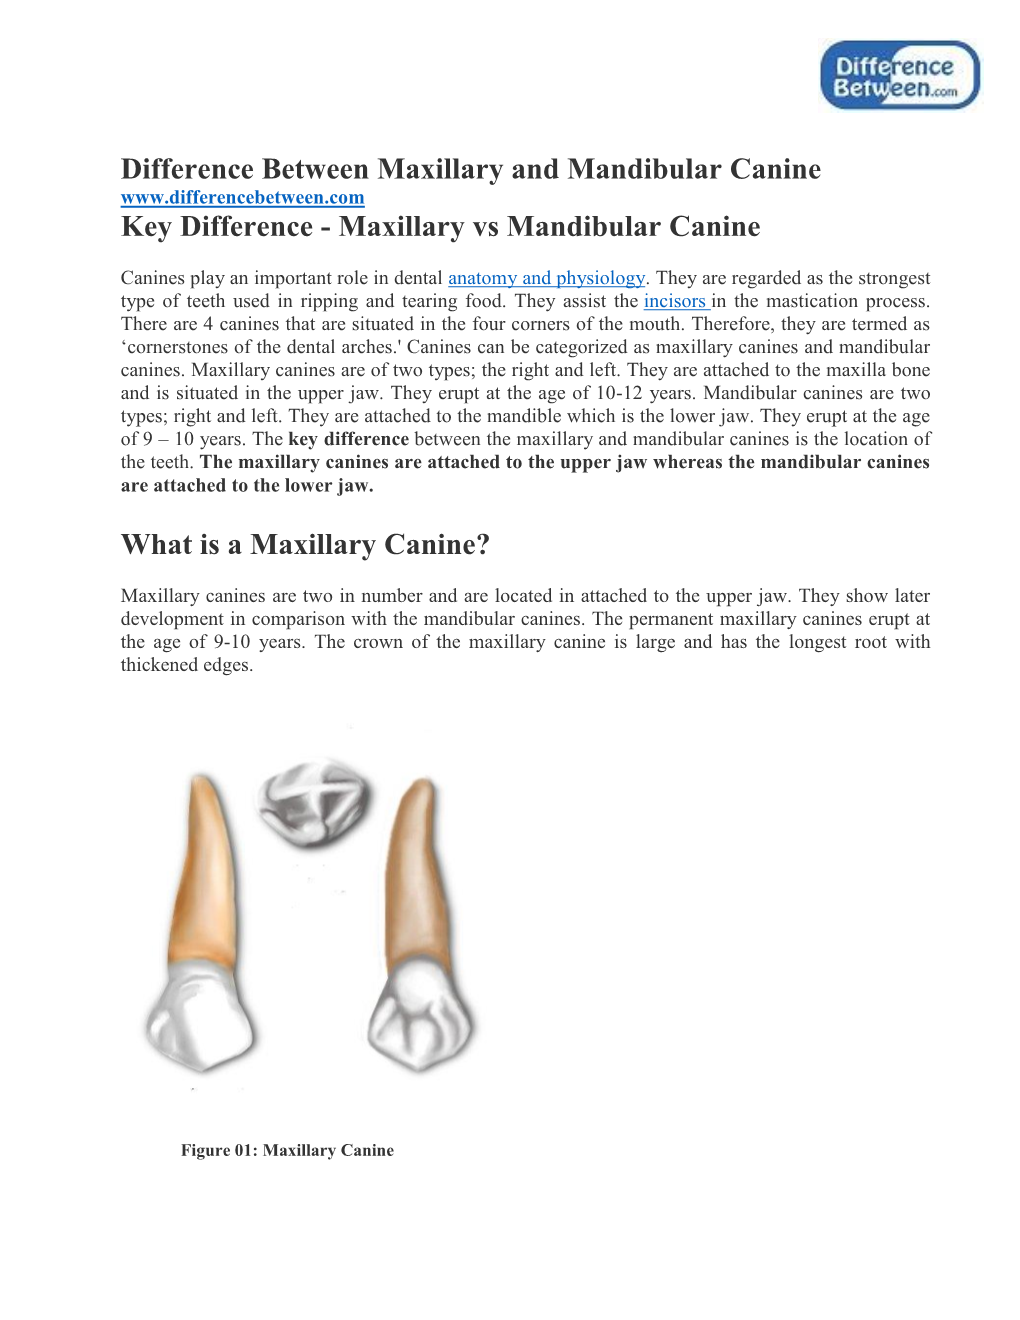 Difference Between Maxillary and Mandibular Canine Key Difference